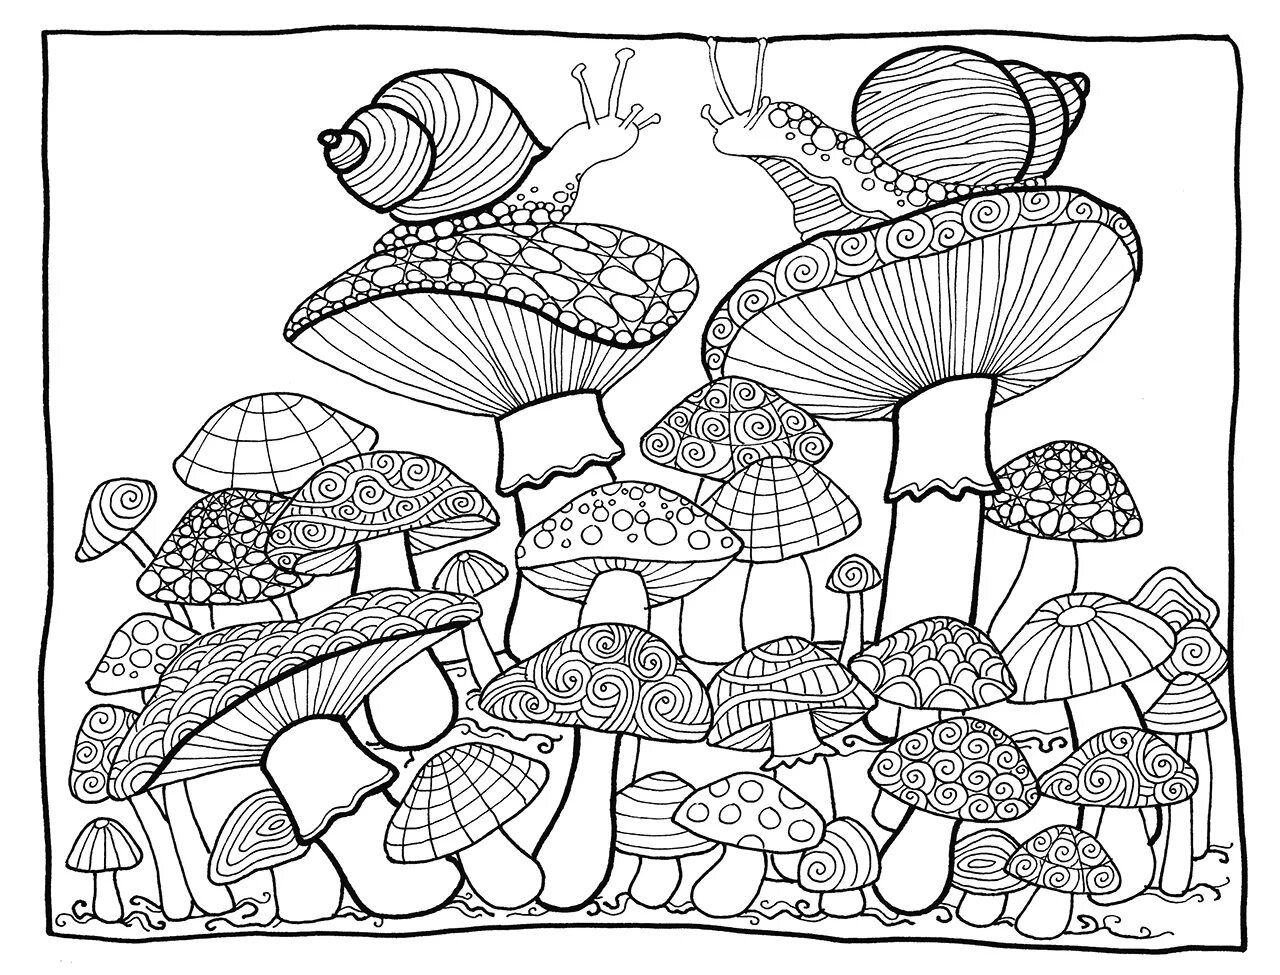 Color-explosive coloring page poster indie kid